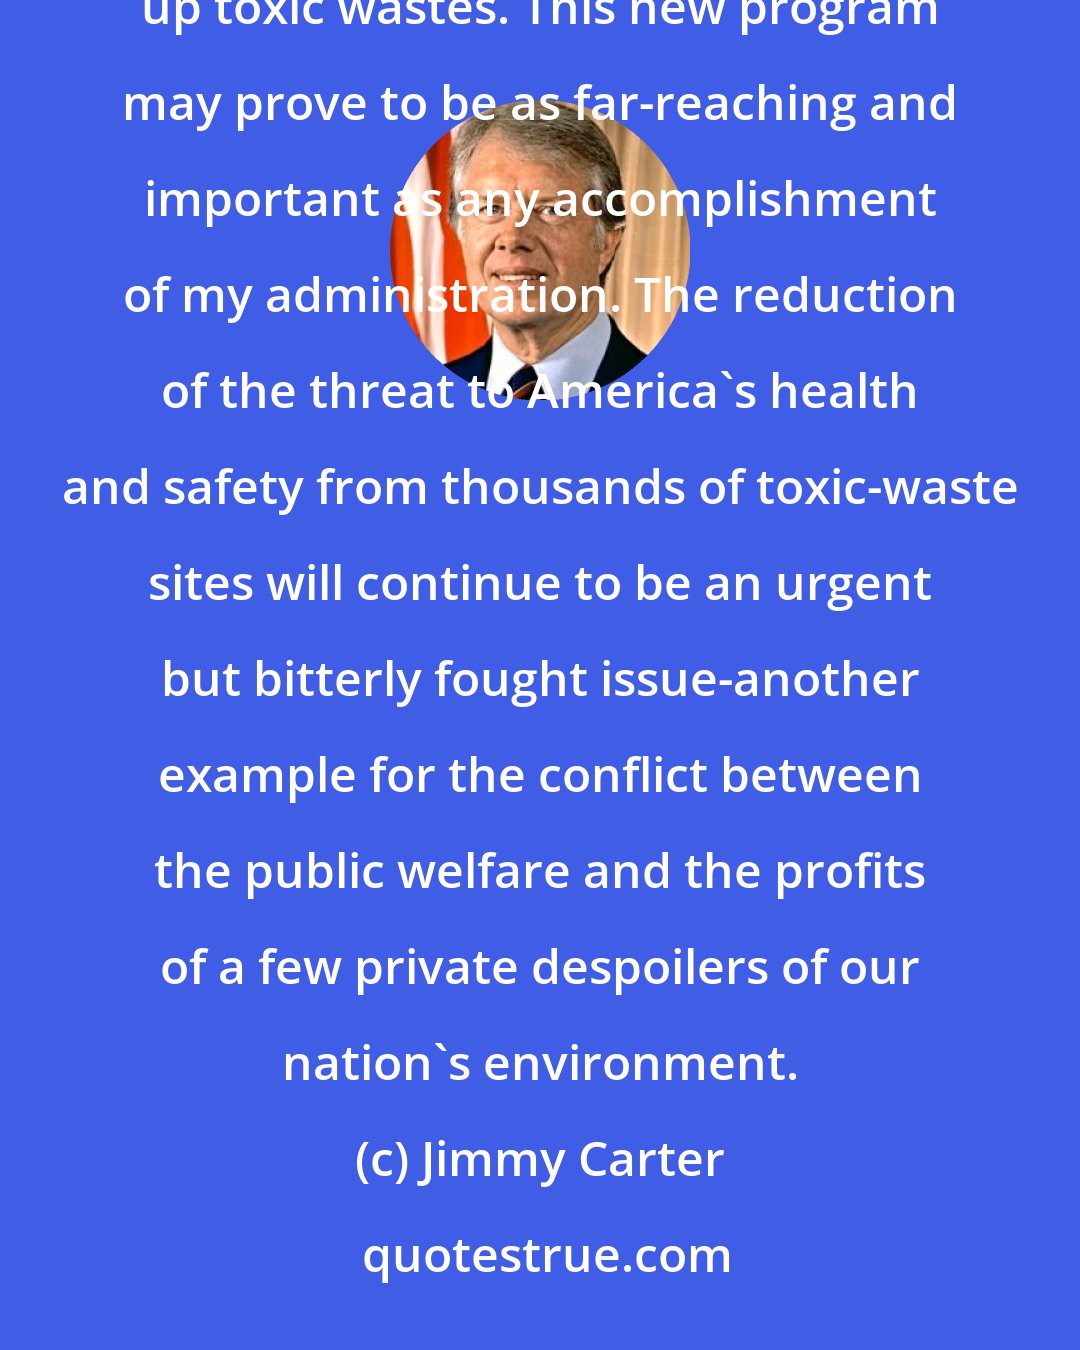 Jimmy Carter: The Superfund legislation set up a system of insurance premiums collected from the chemical industry to clean up toxic wastes. This new program may prove to be as far-reaching and important as any accomplishment of my administration. The reduction of the threat to America's health and safety from thousands of toxic-waste sites will continue to be an urgent but bitterly fought issue-another example for the conflict between the public welfare and the profits of a few private despoilers of our nation's environment.